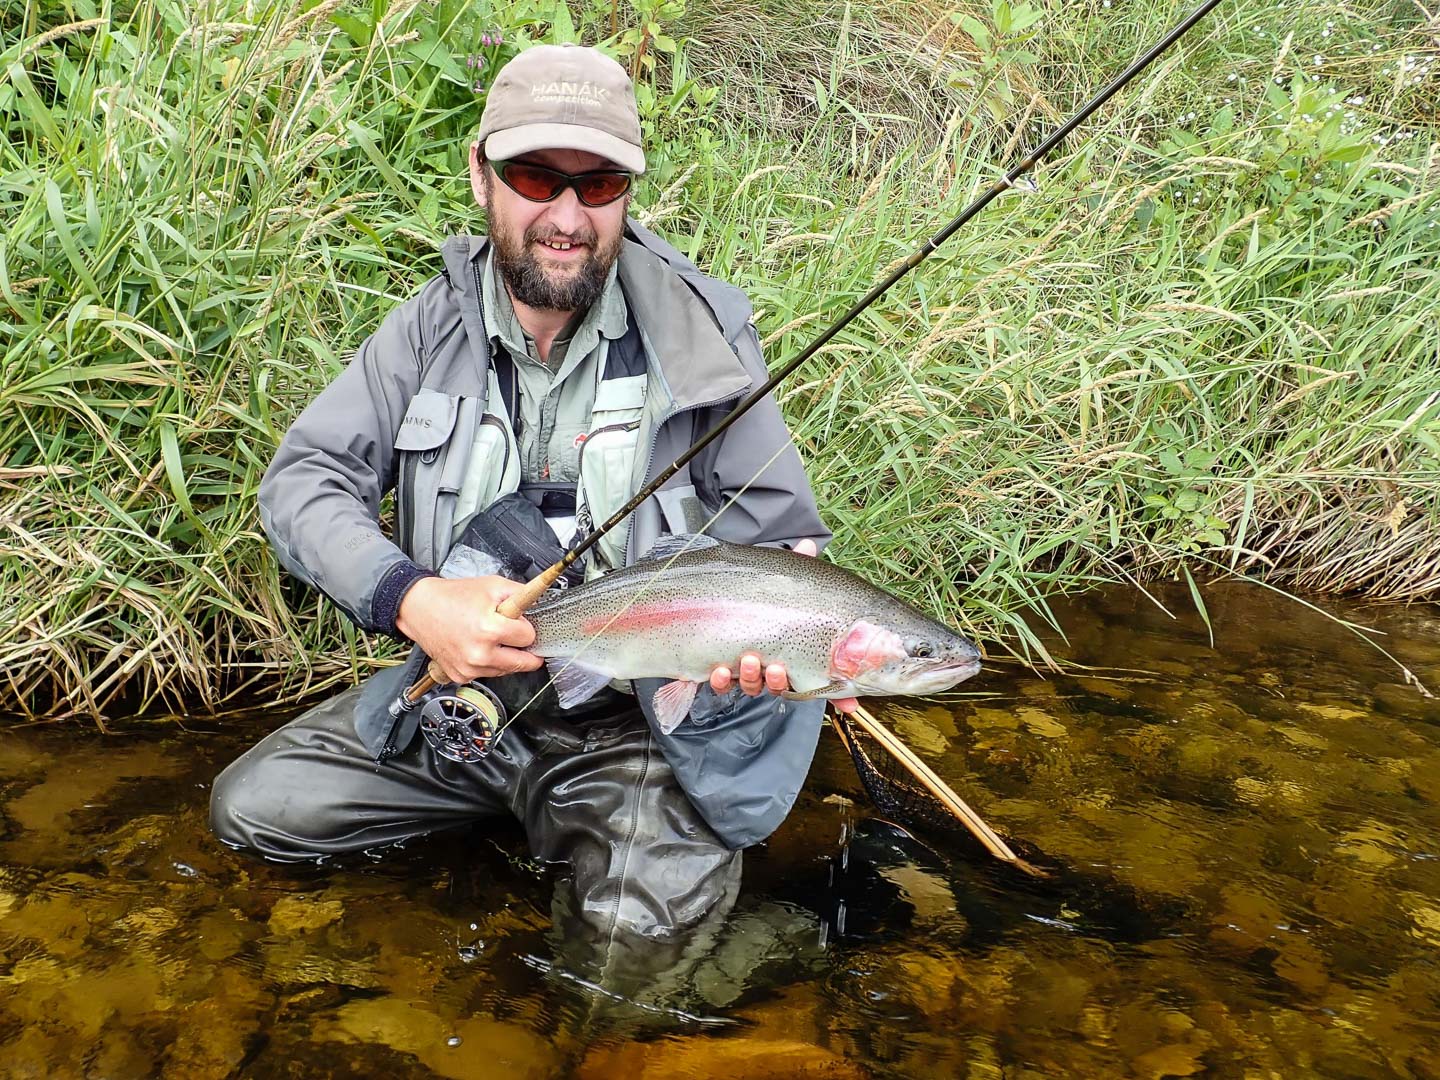 Martin Droz, world fly fishing champion, likes our rivers